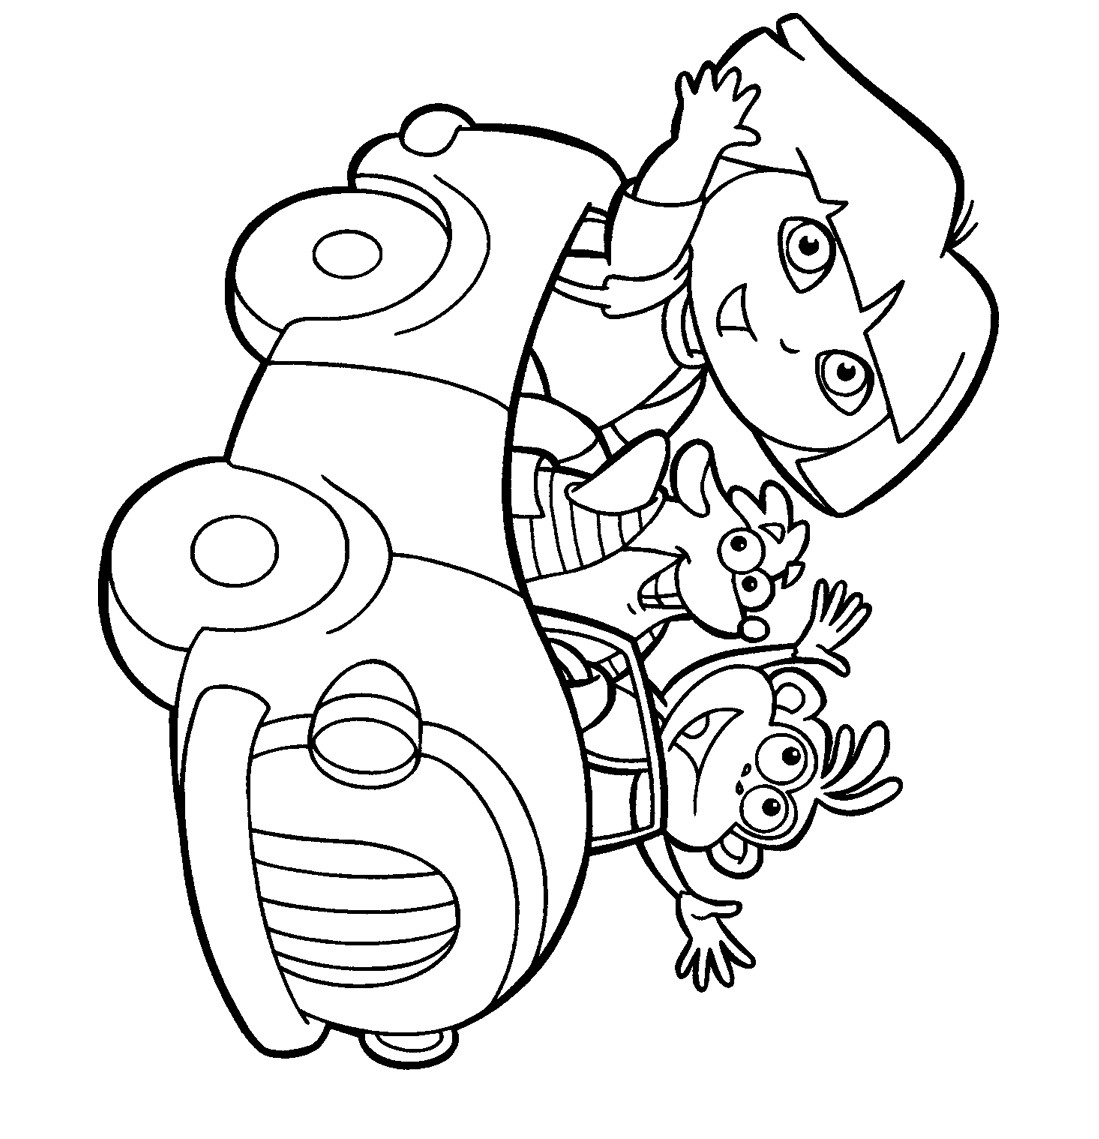 Free Online Coloring Pages For Kids
 Printable coloring pages for kids